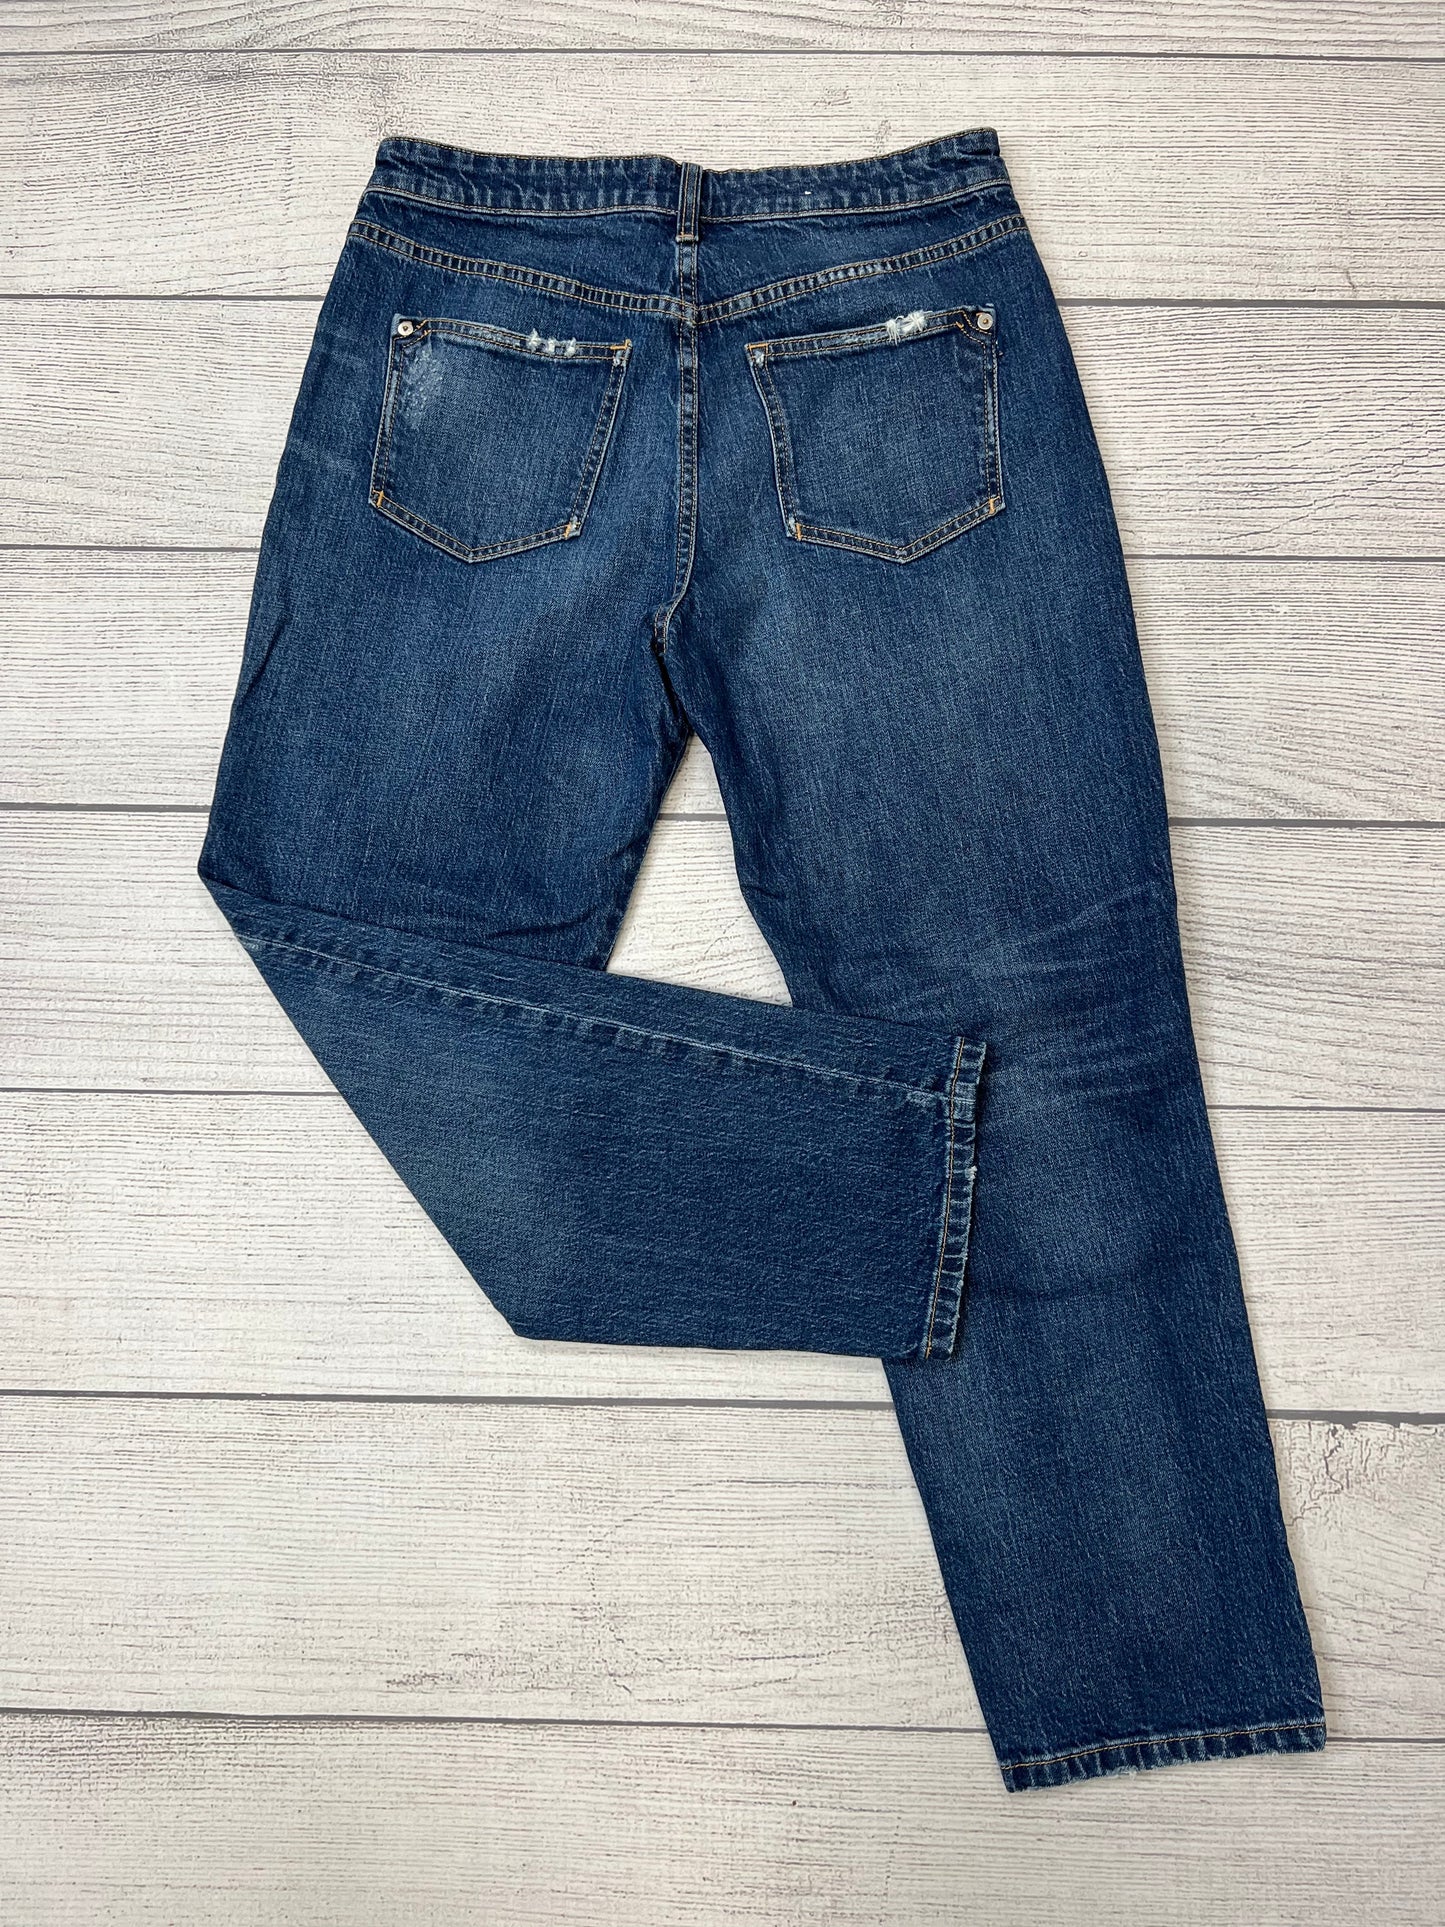 Jeans Relaxed/boyfriend By Pilcro  Size: 6